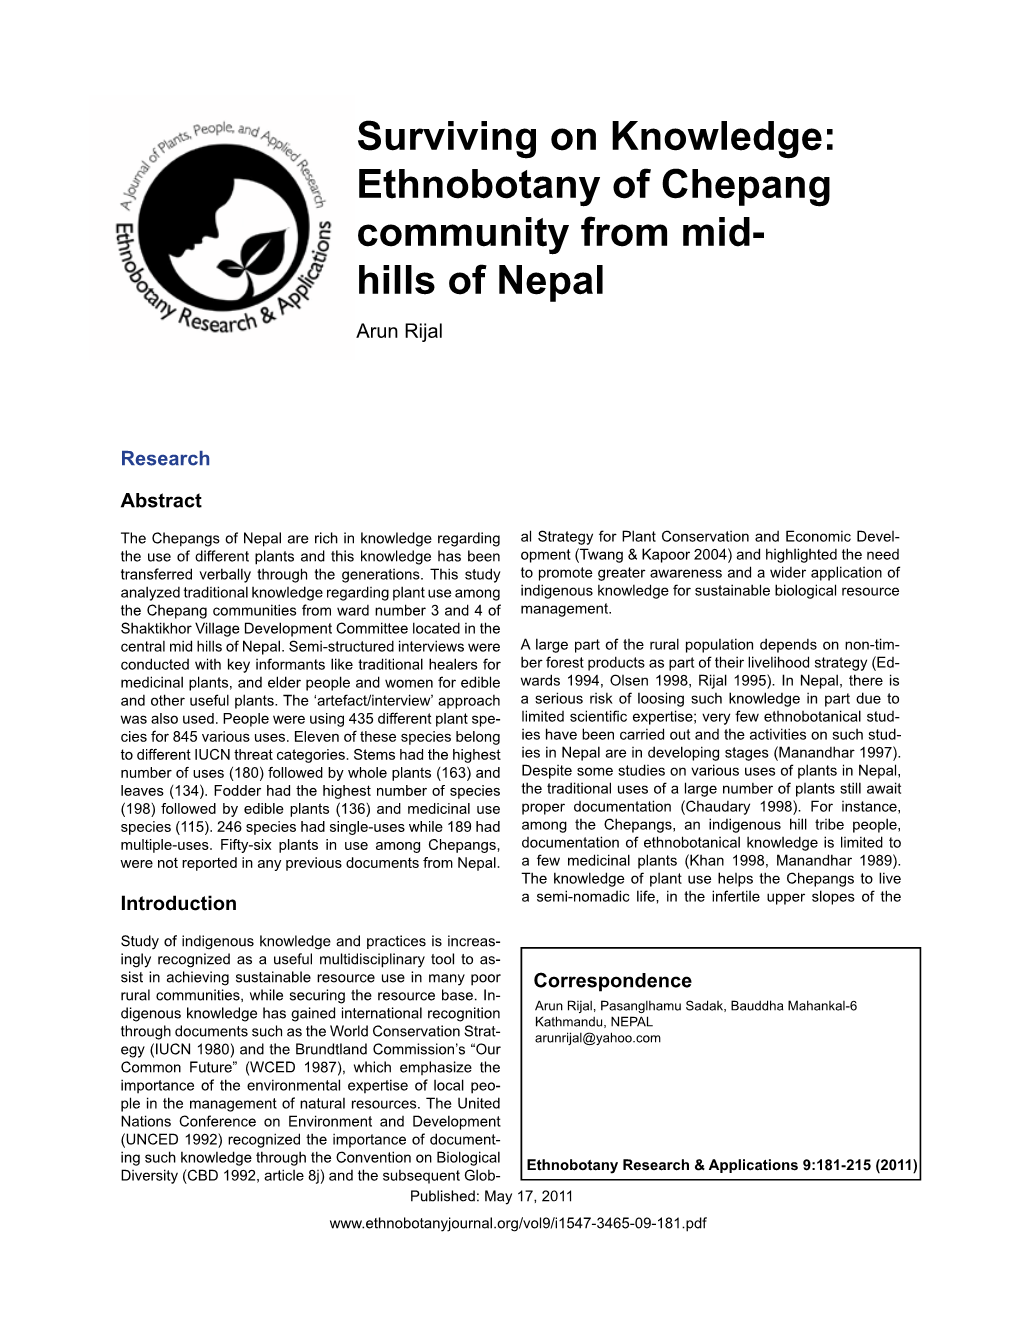 Ethnobotany of Chepang Community from Mid- Hills of Nepal Arun Rijal